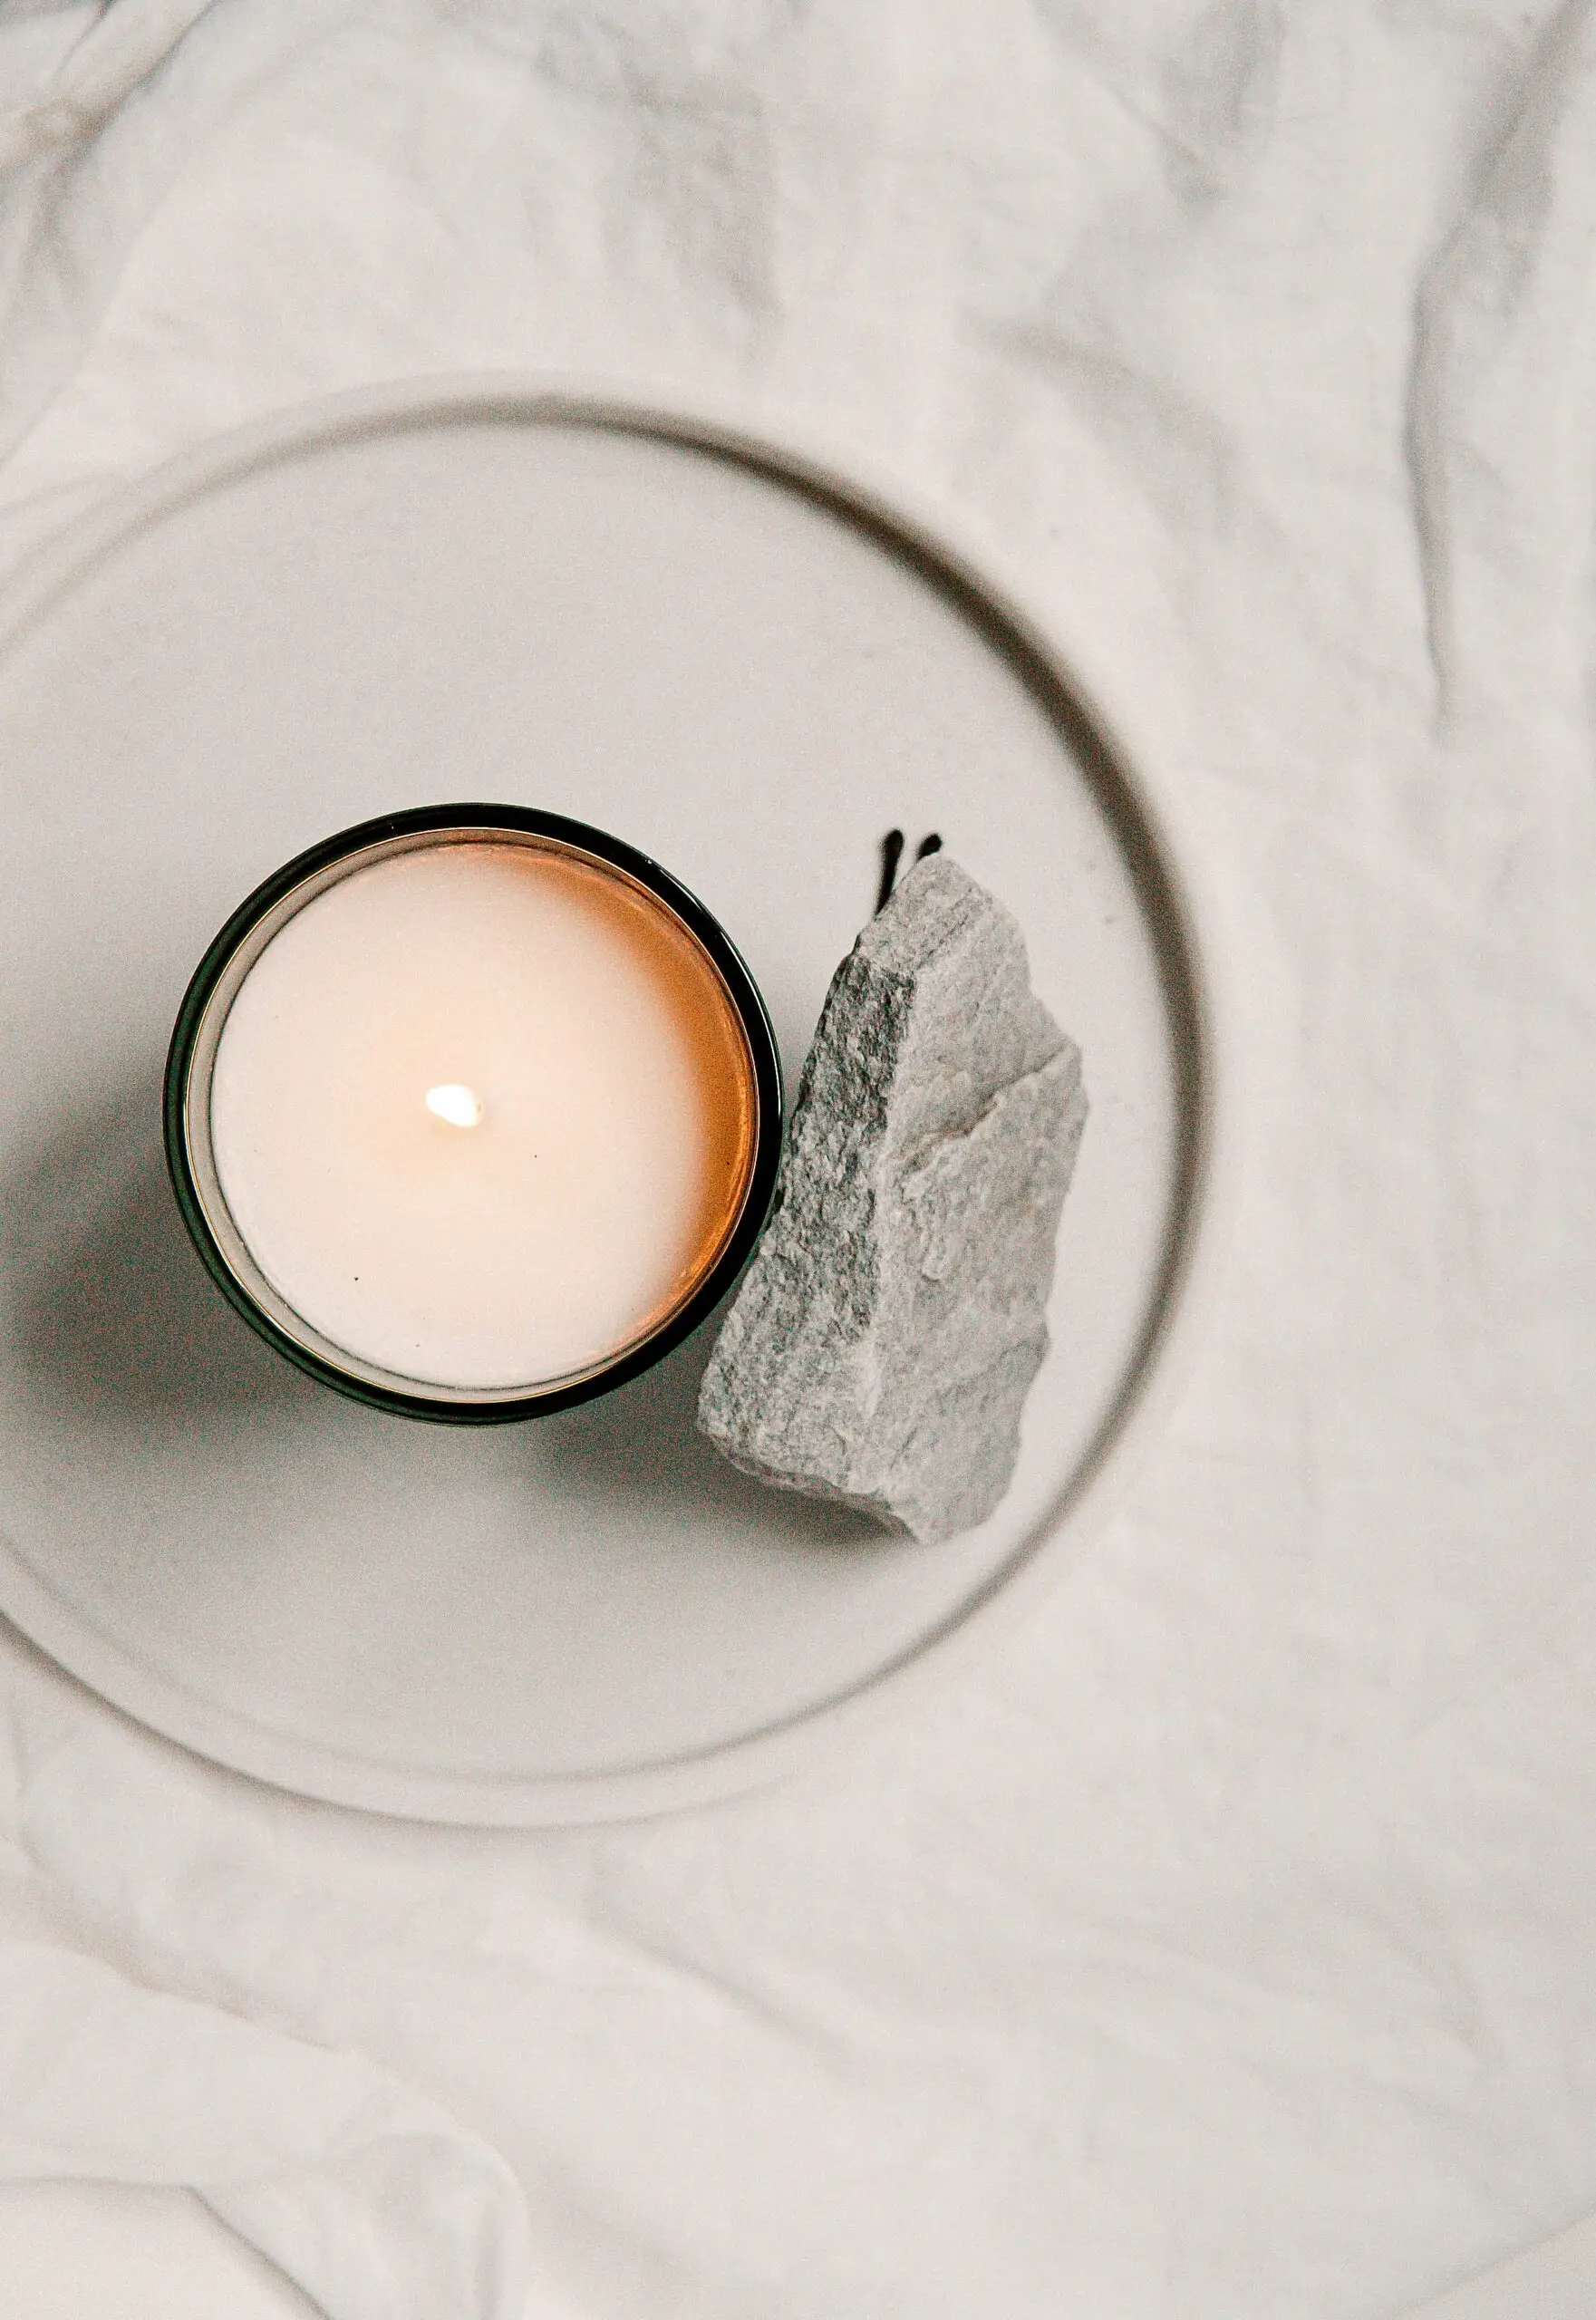 white candle and rose quarts could help lighten your mood